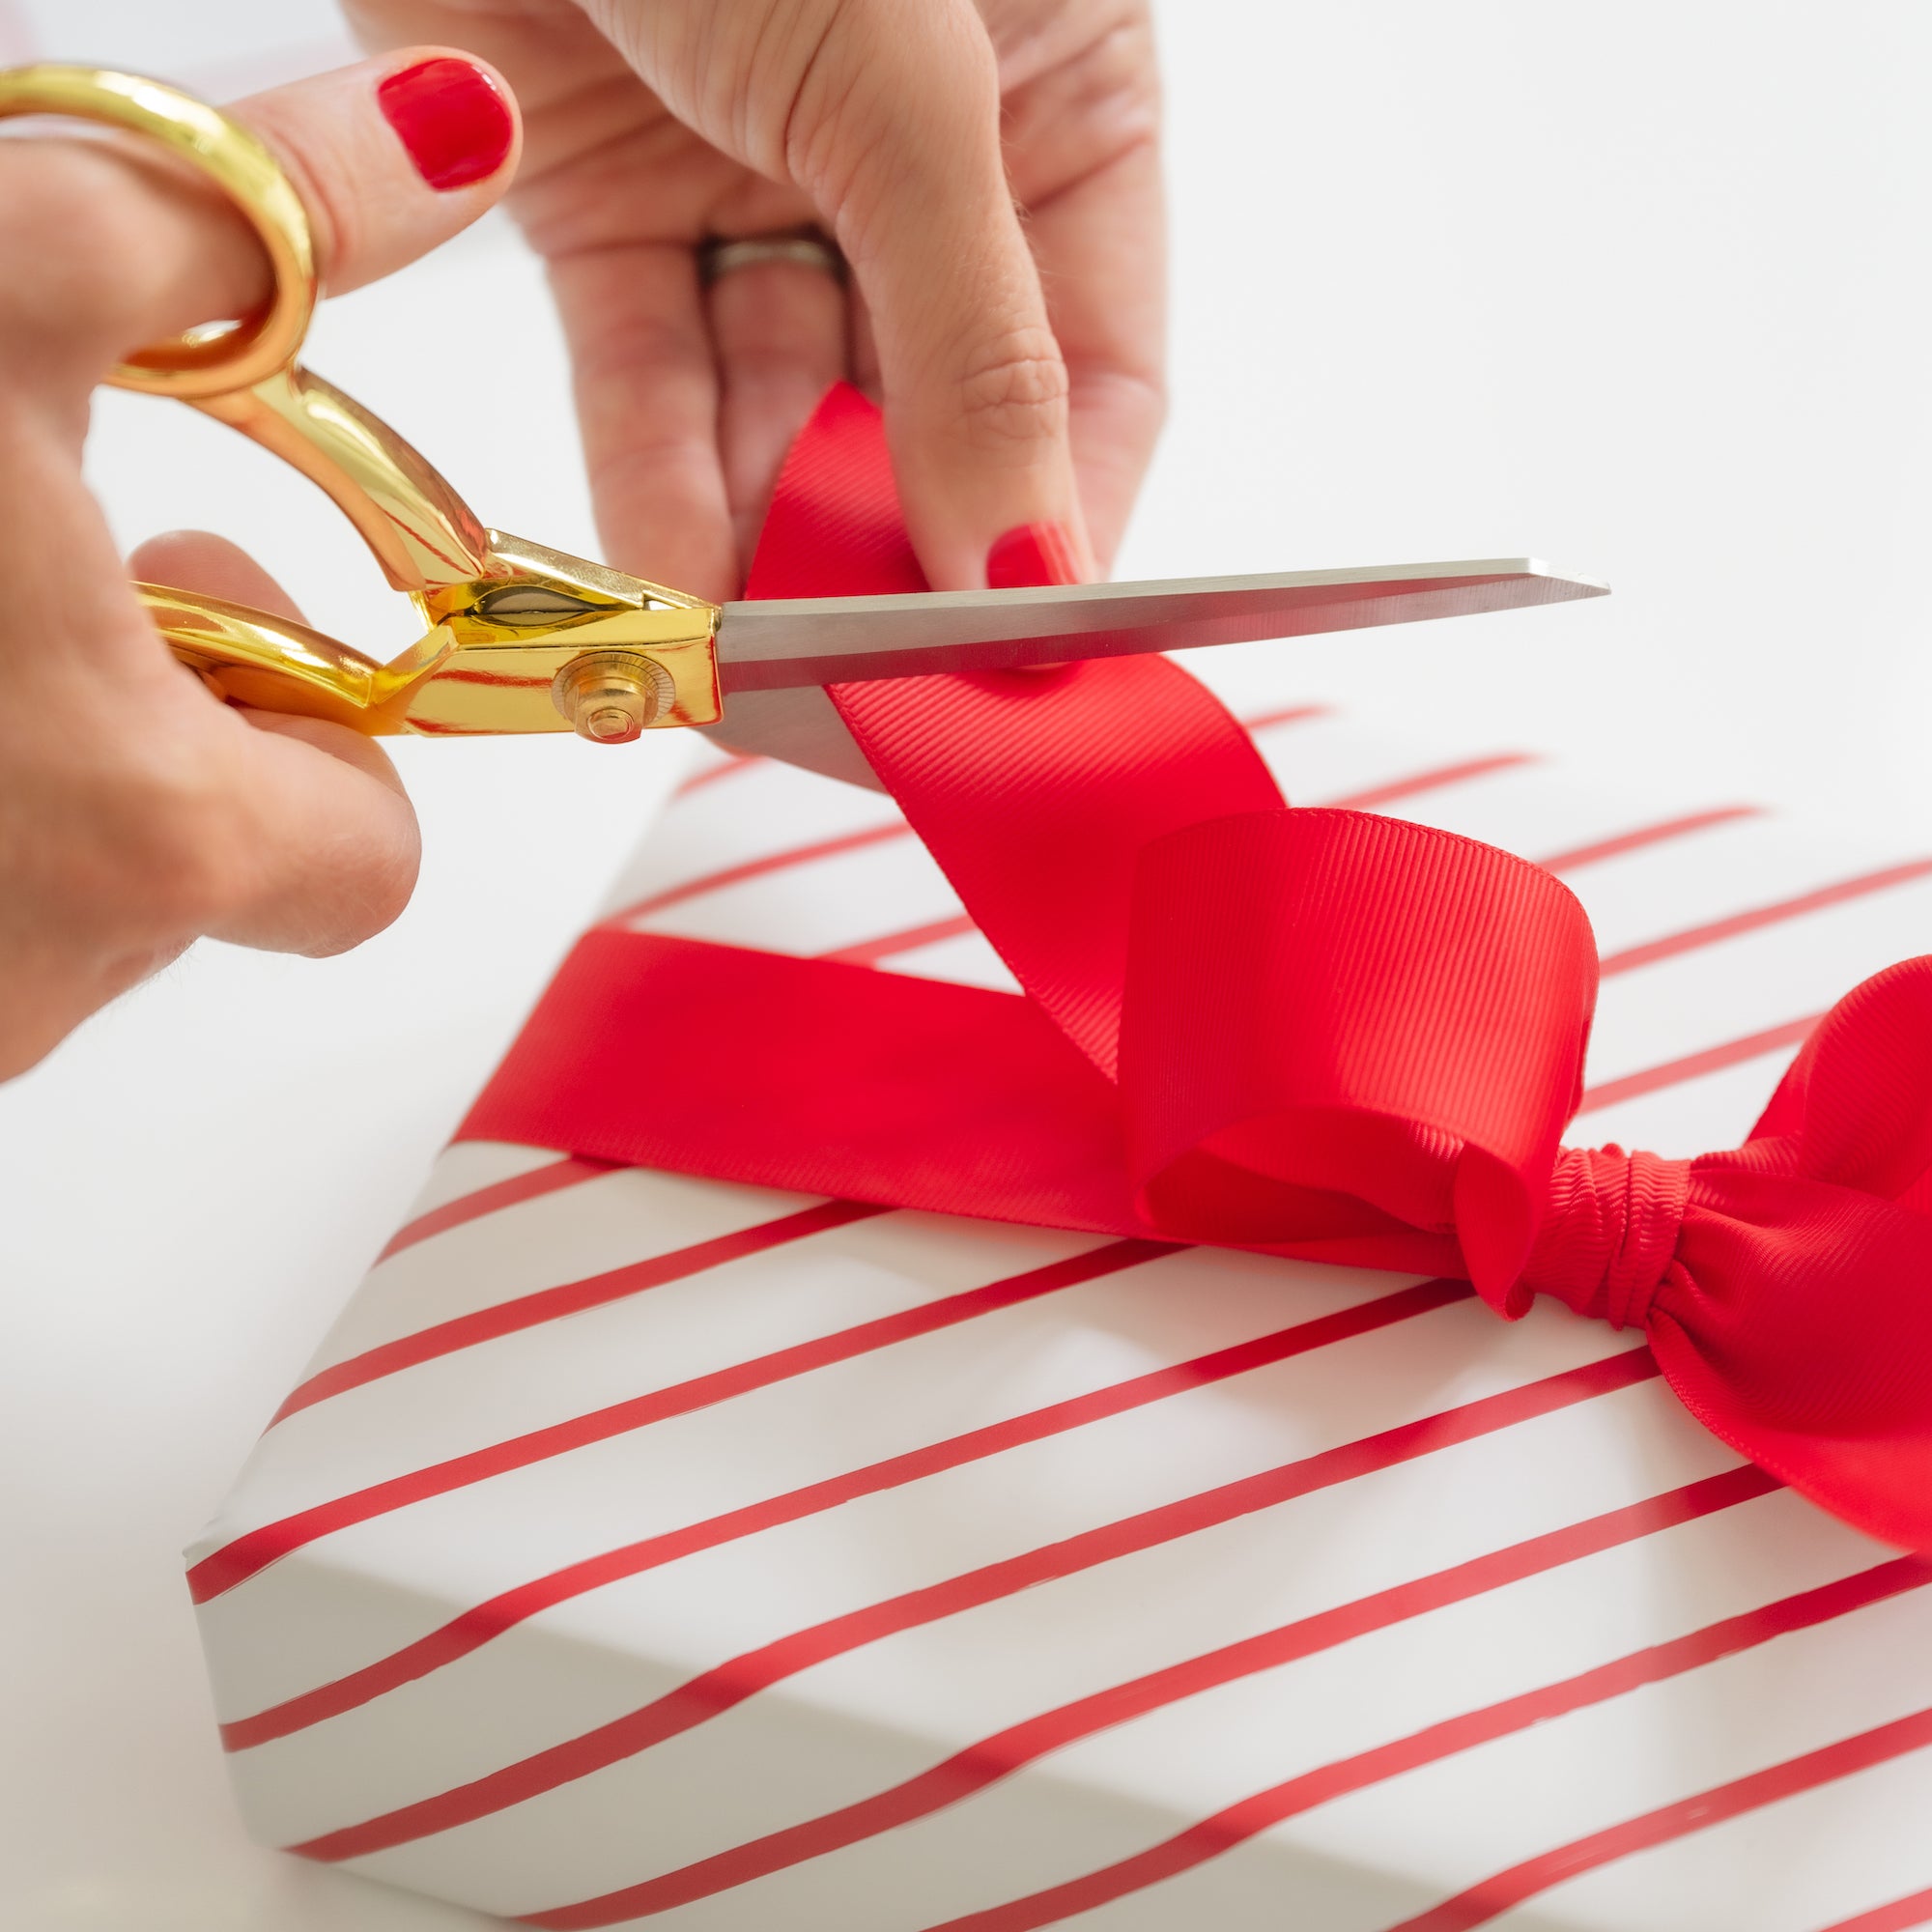 Cutting ribbon edges on a gift